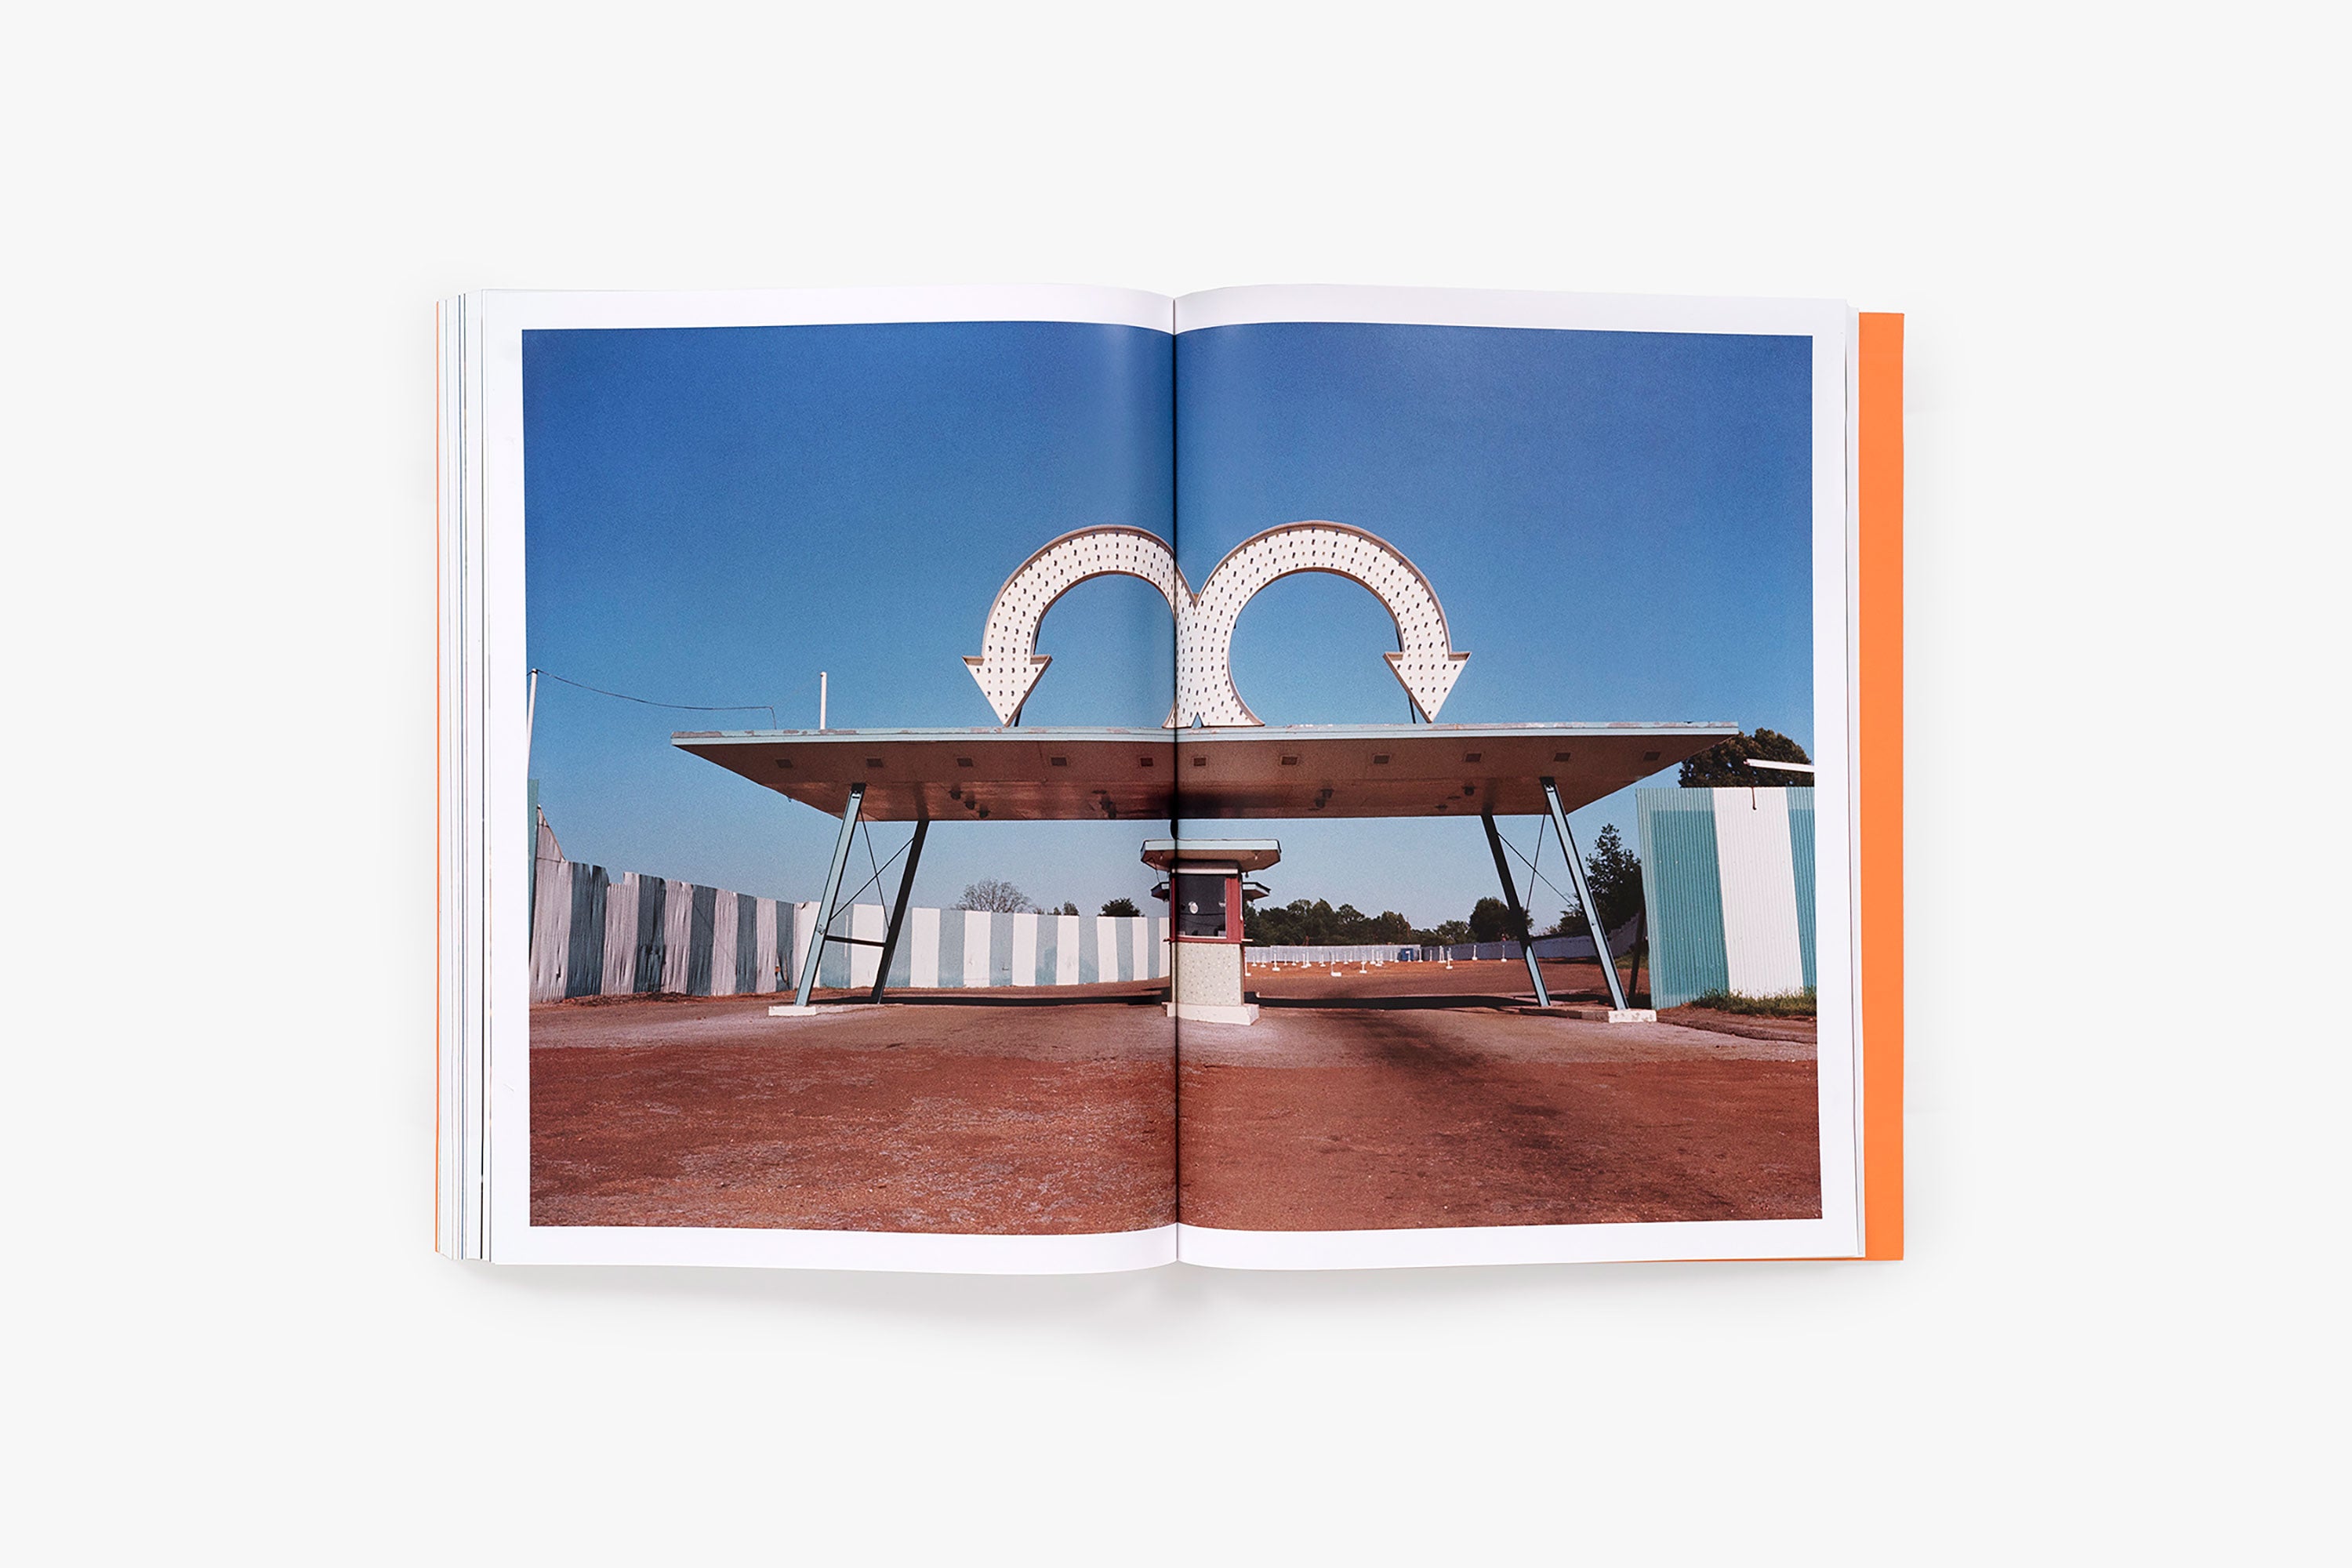 William Eggleston: The Outlands - Selected Works